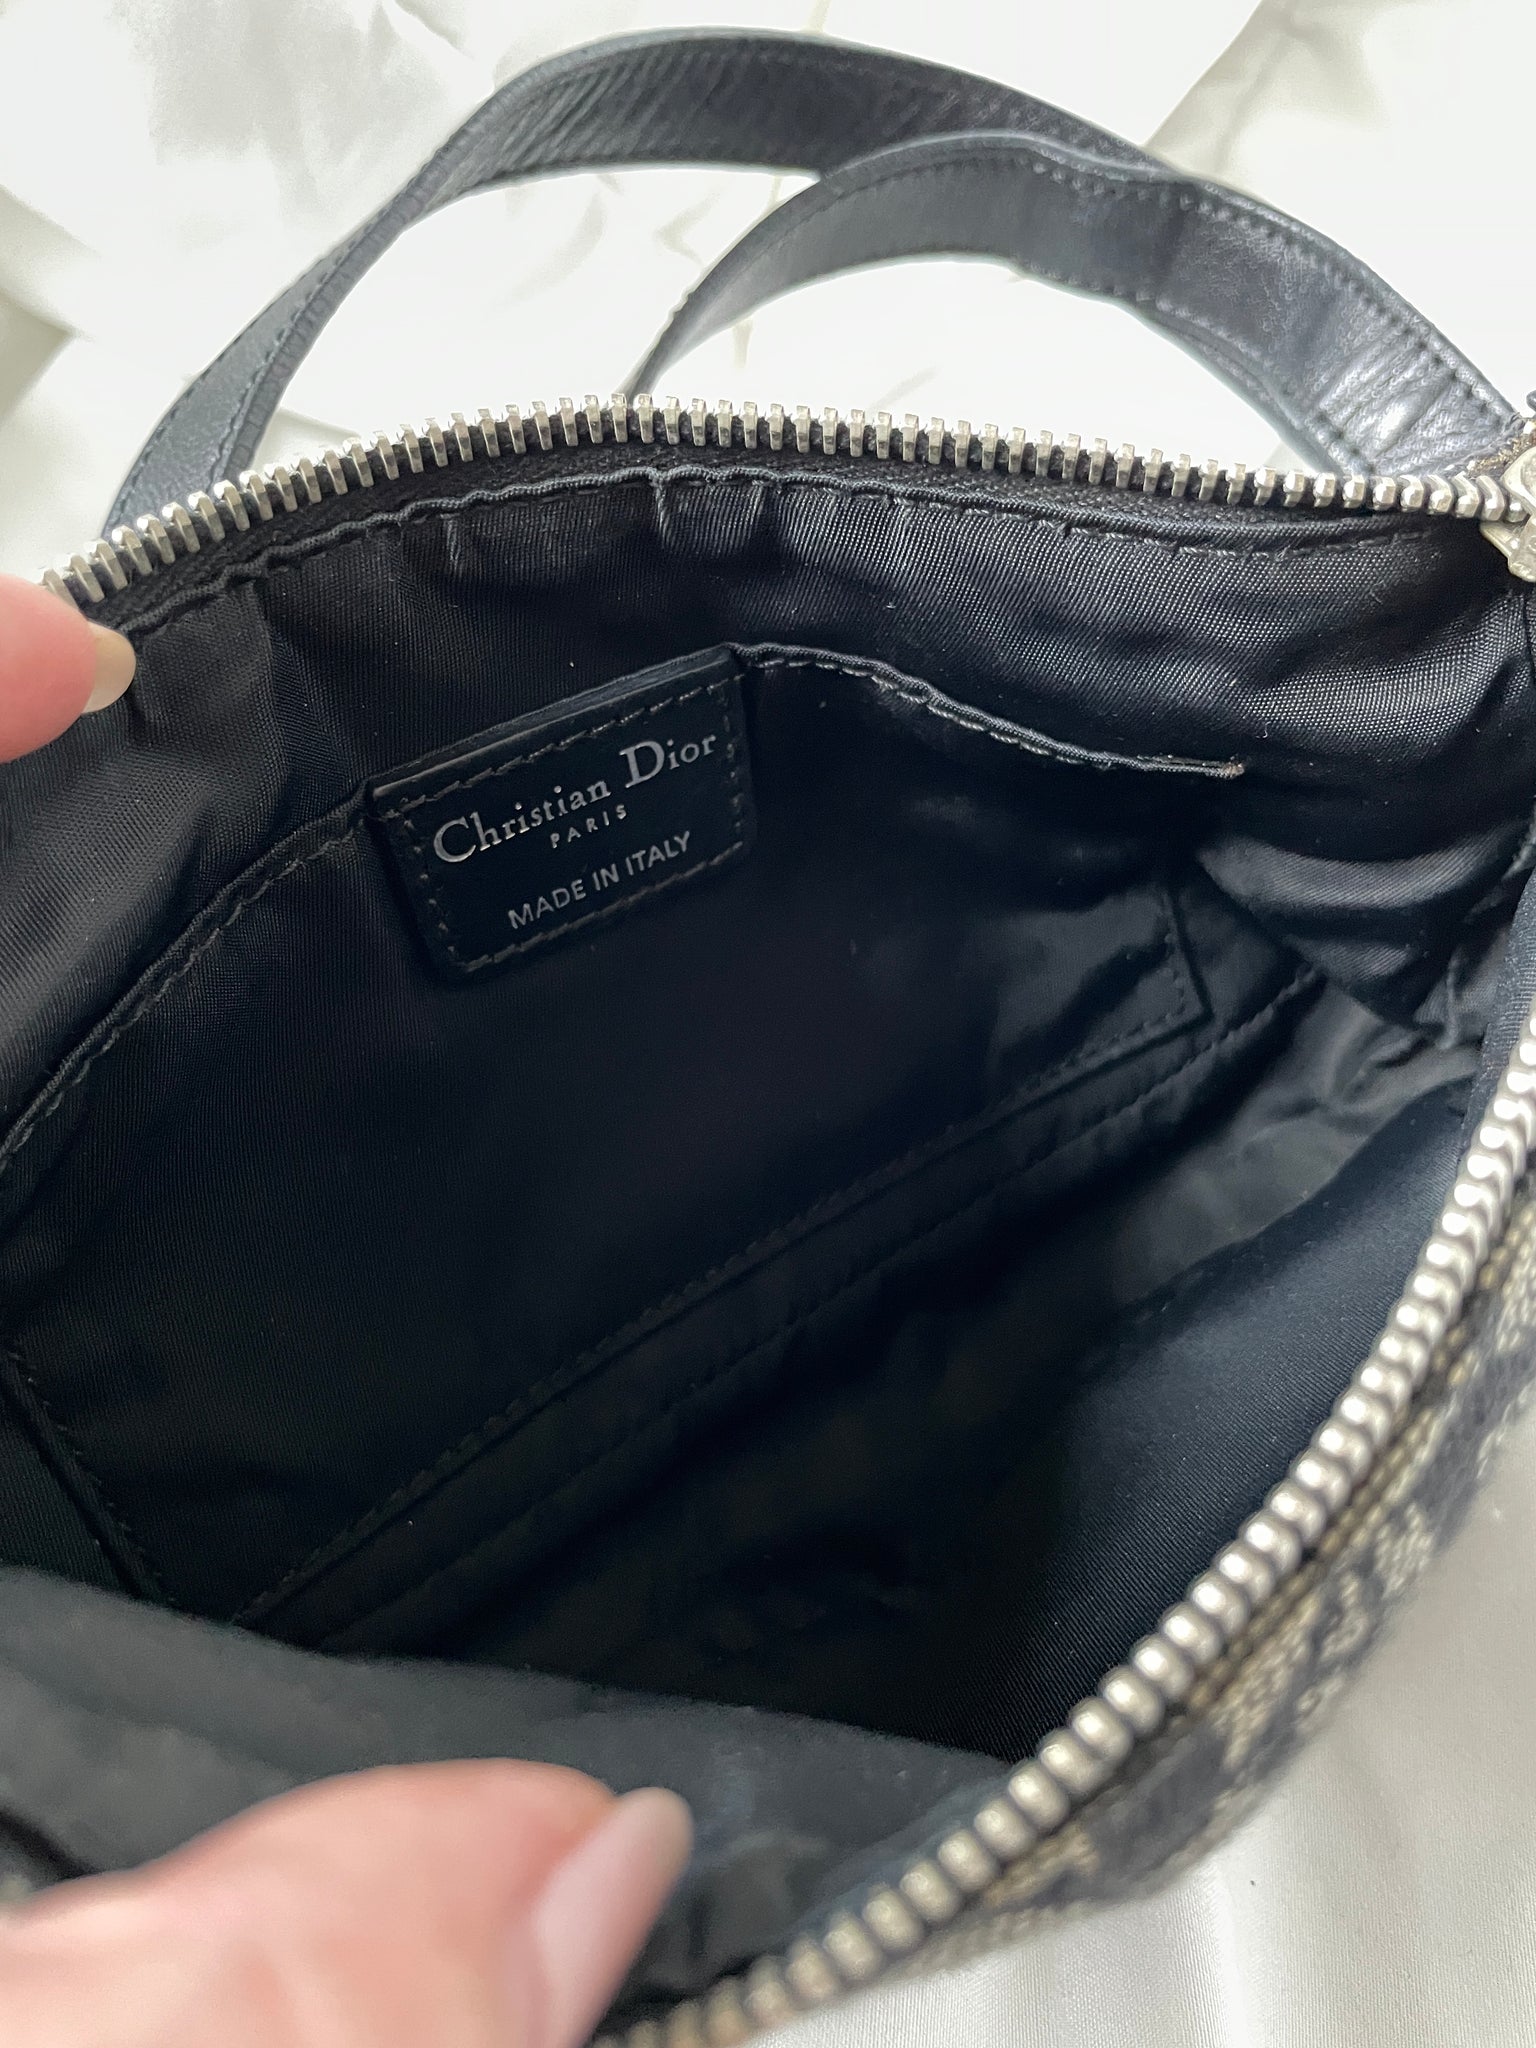 Extremely Rare Dior Trotter Bag